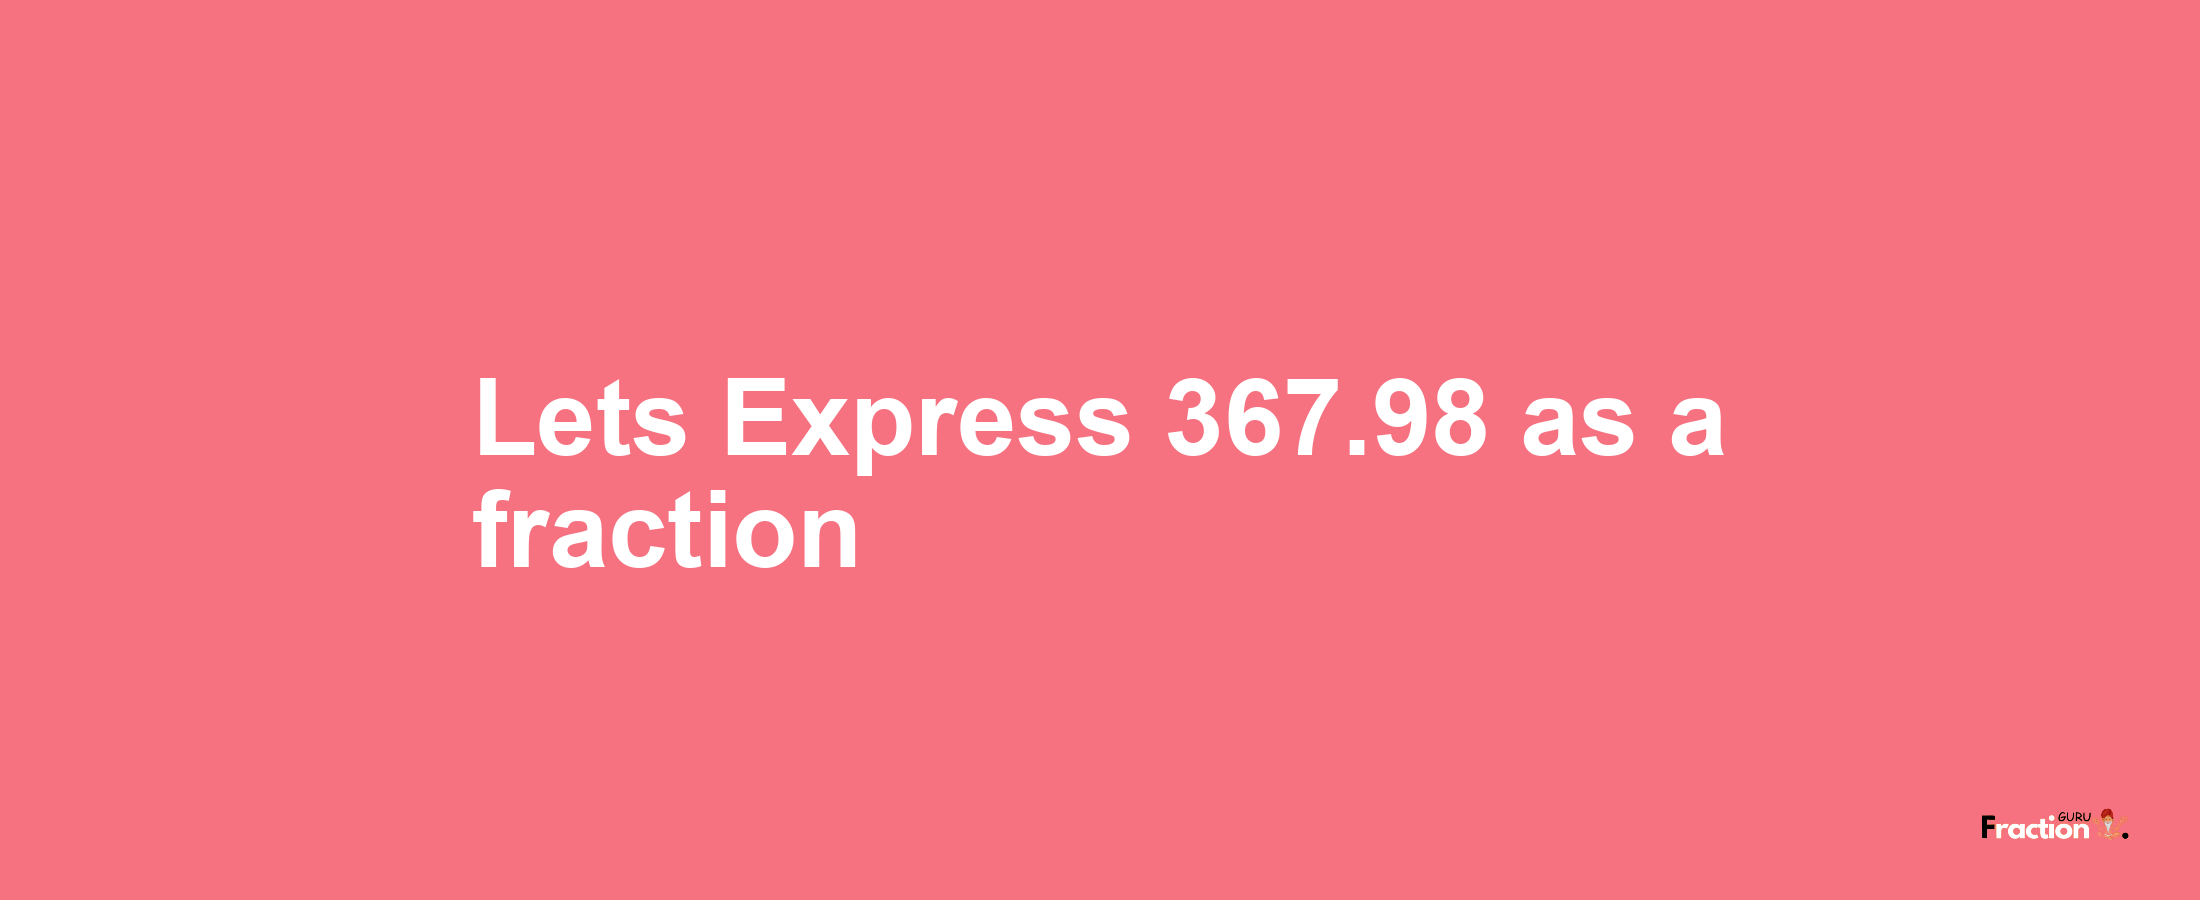 Lets Express 367.98 as afraction